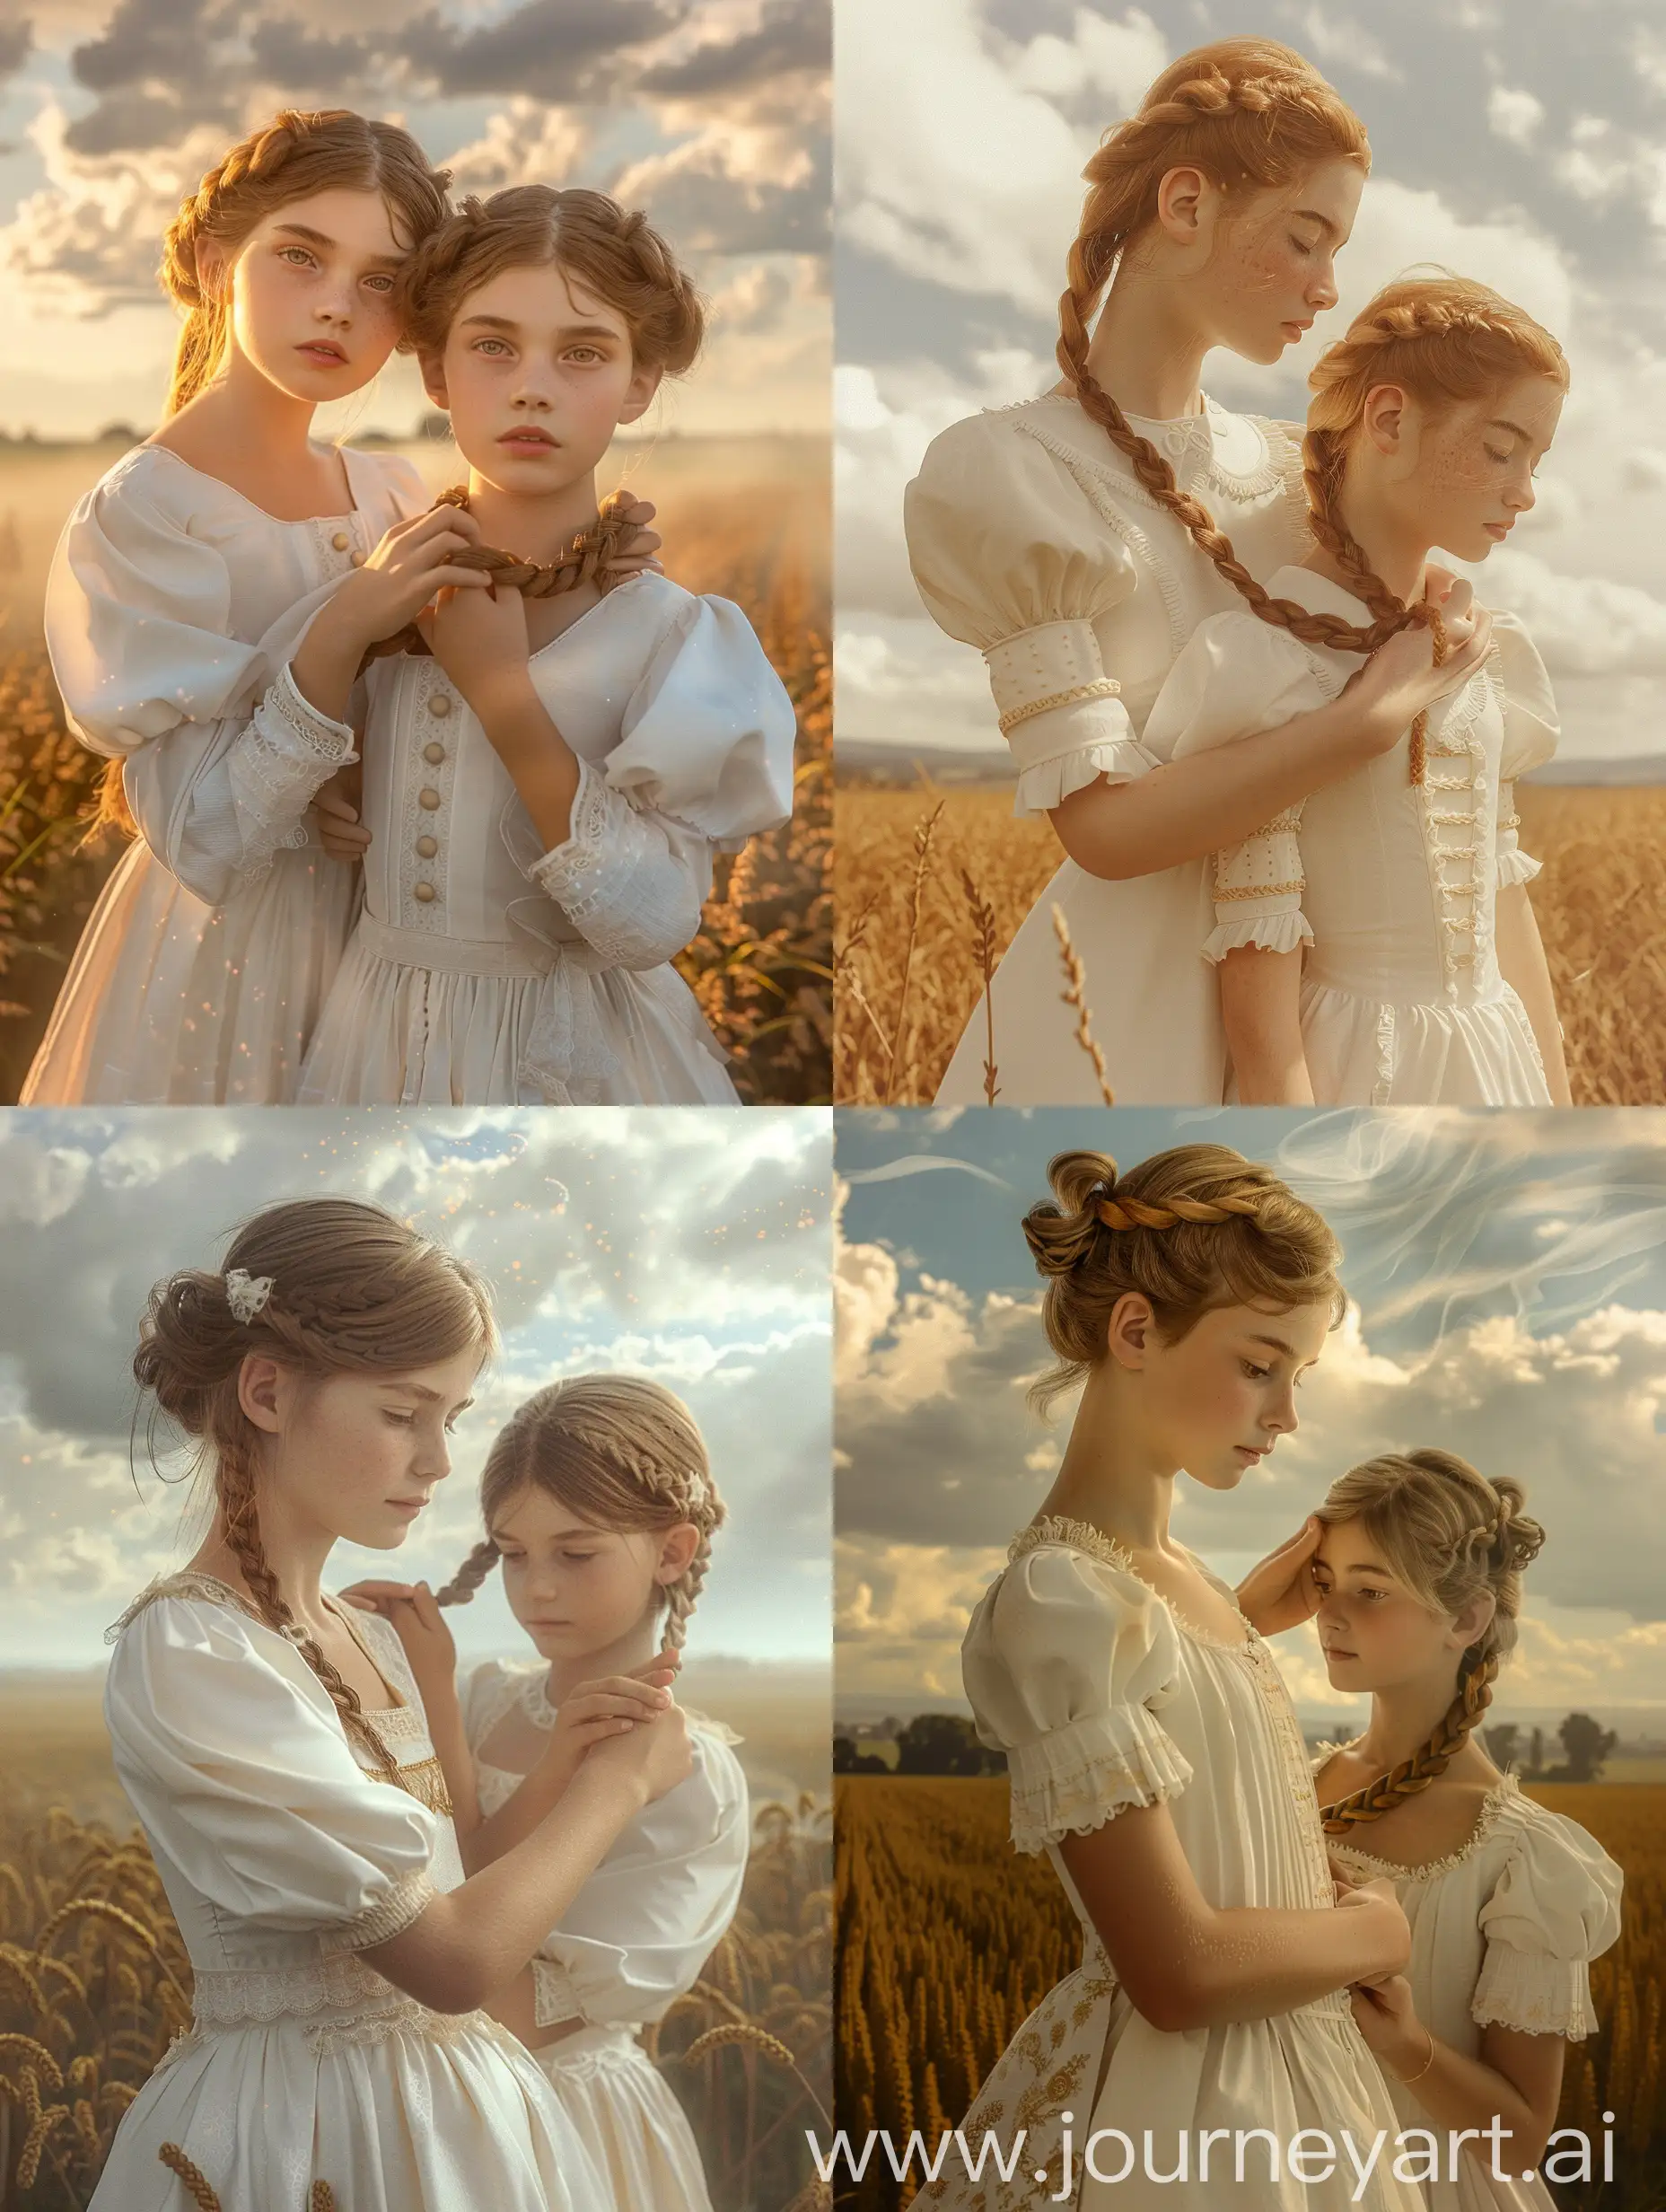 Twin-Sisters-Braiding-Hair-in-Empirestyle-Dresses-amidst-Golden-Rural-Landscape